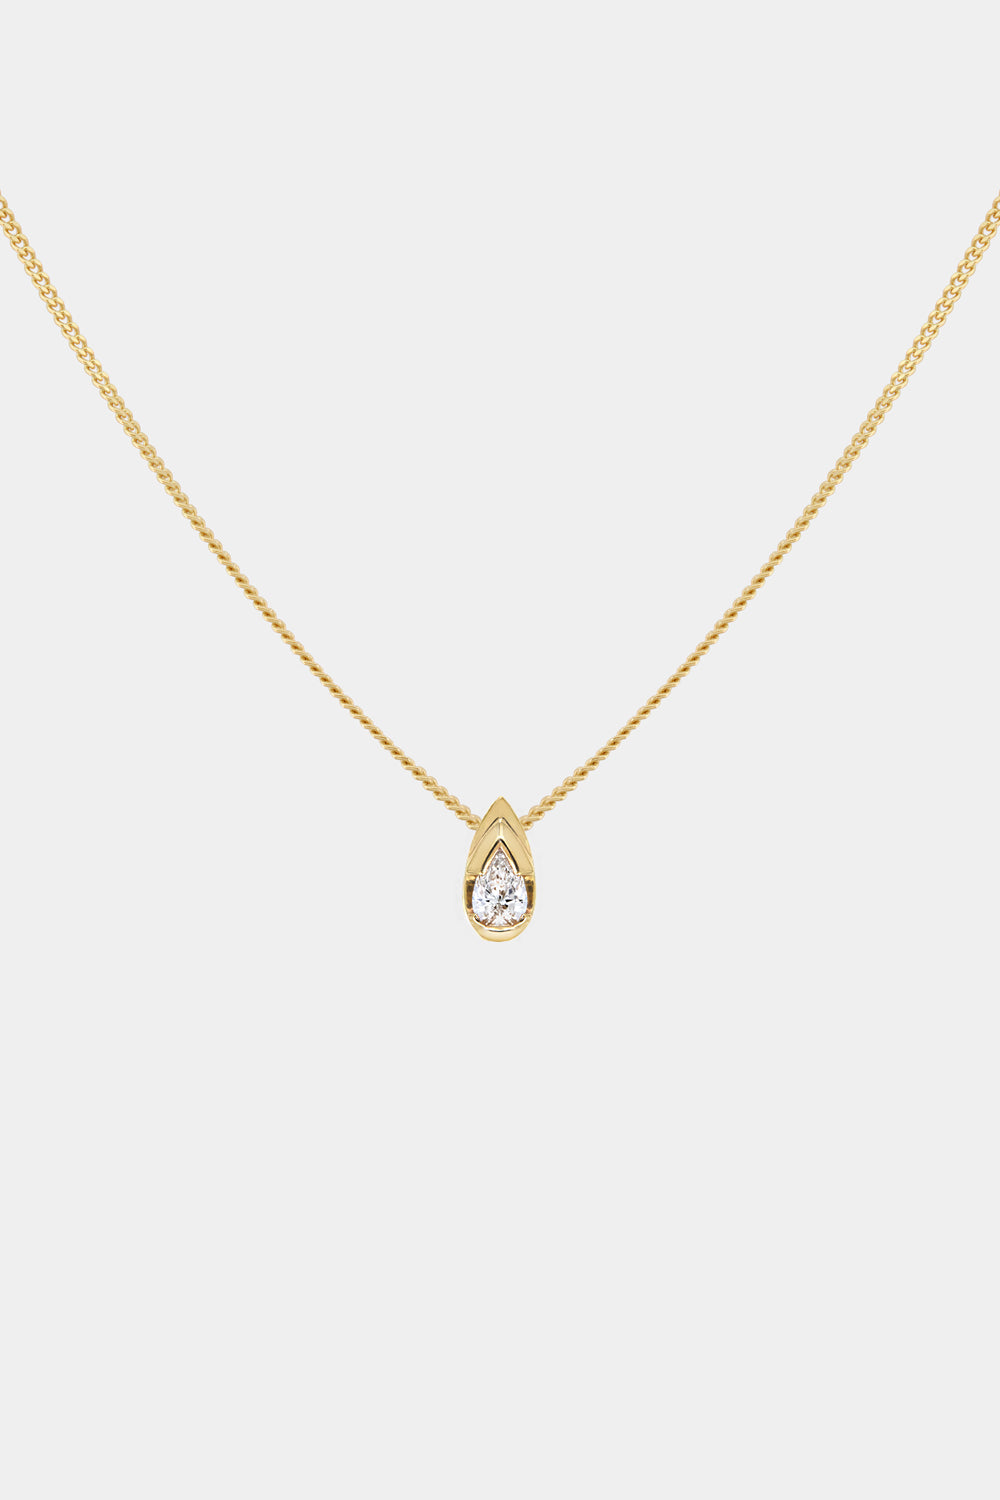 Mini Pear Diamond Necklace | 9K Yellow or Rose Gold, More Options Available